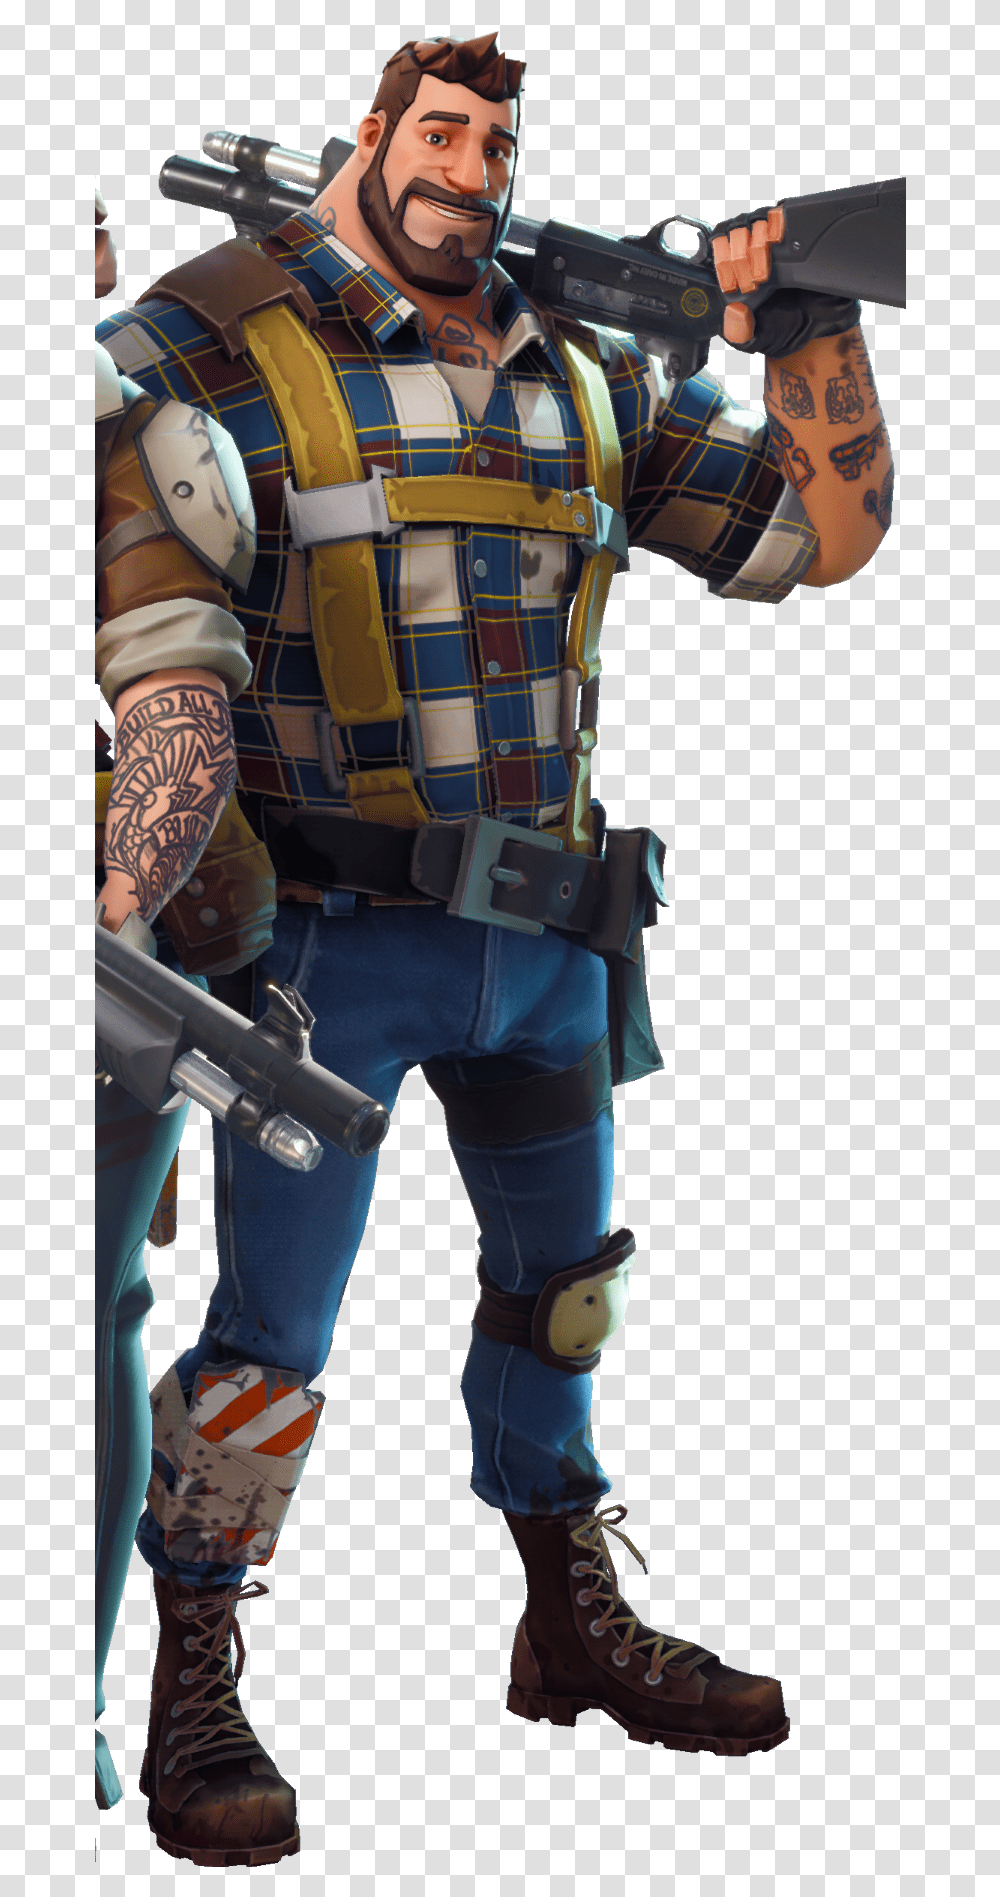 Fortnite Background Sky Pictures And Fortnite Save The World Characters, Skin, Person, Human, Gun Transparent Png